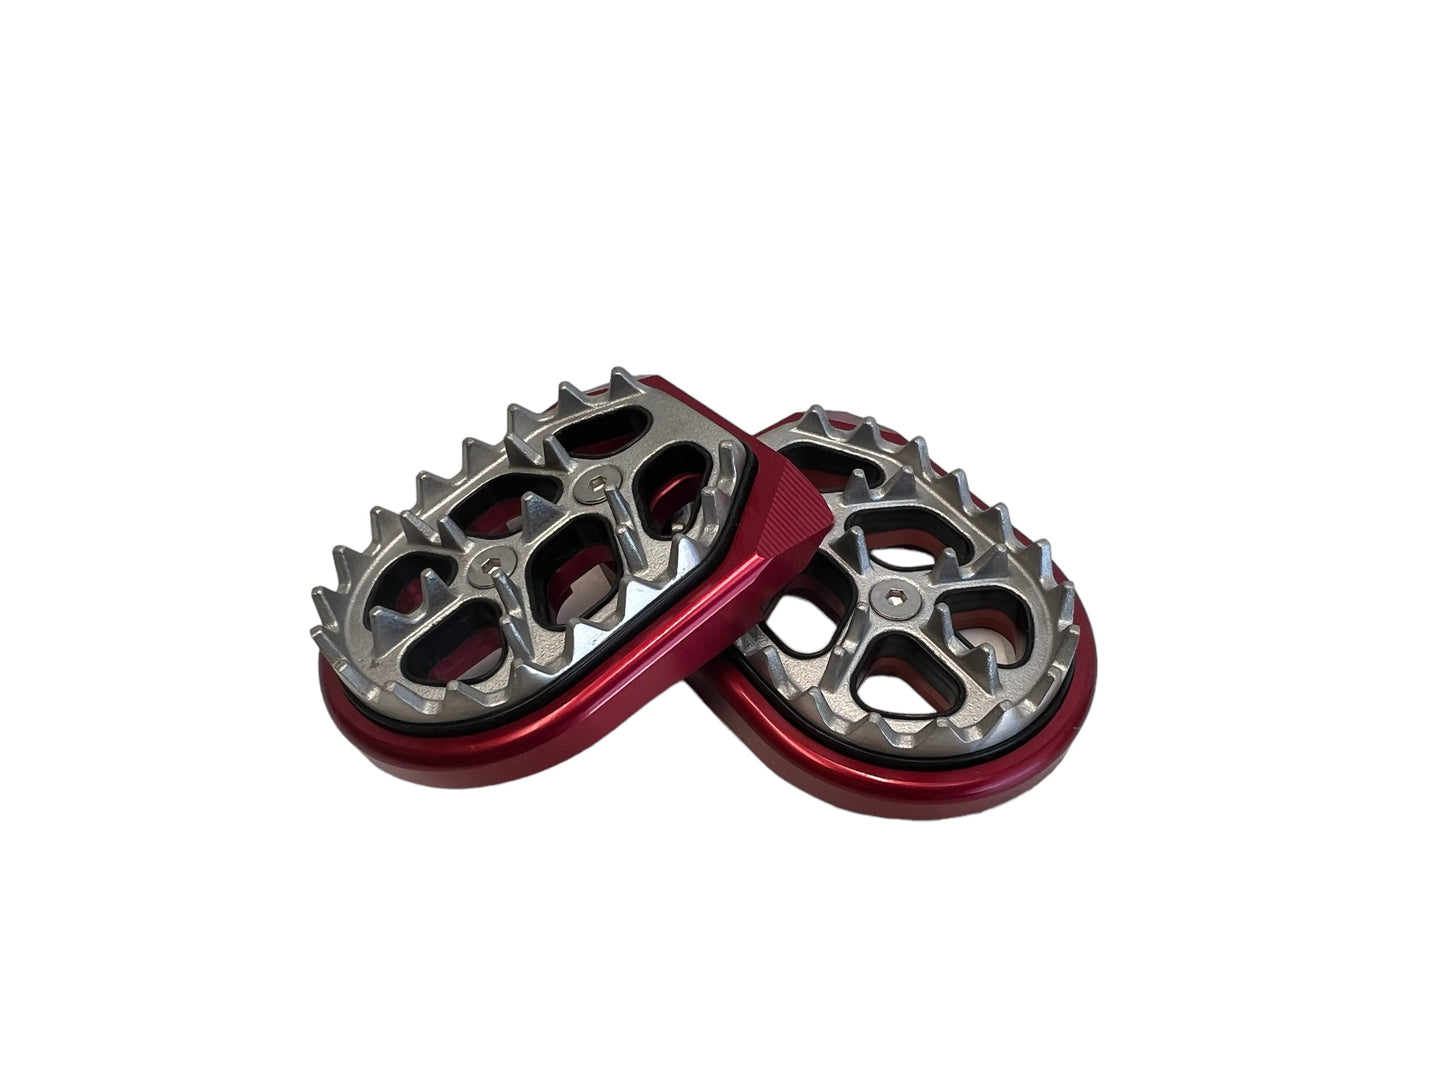 Stacyc CNC Anodized Foot Pegs - Red